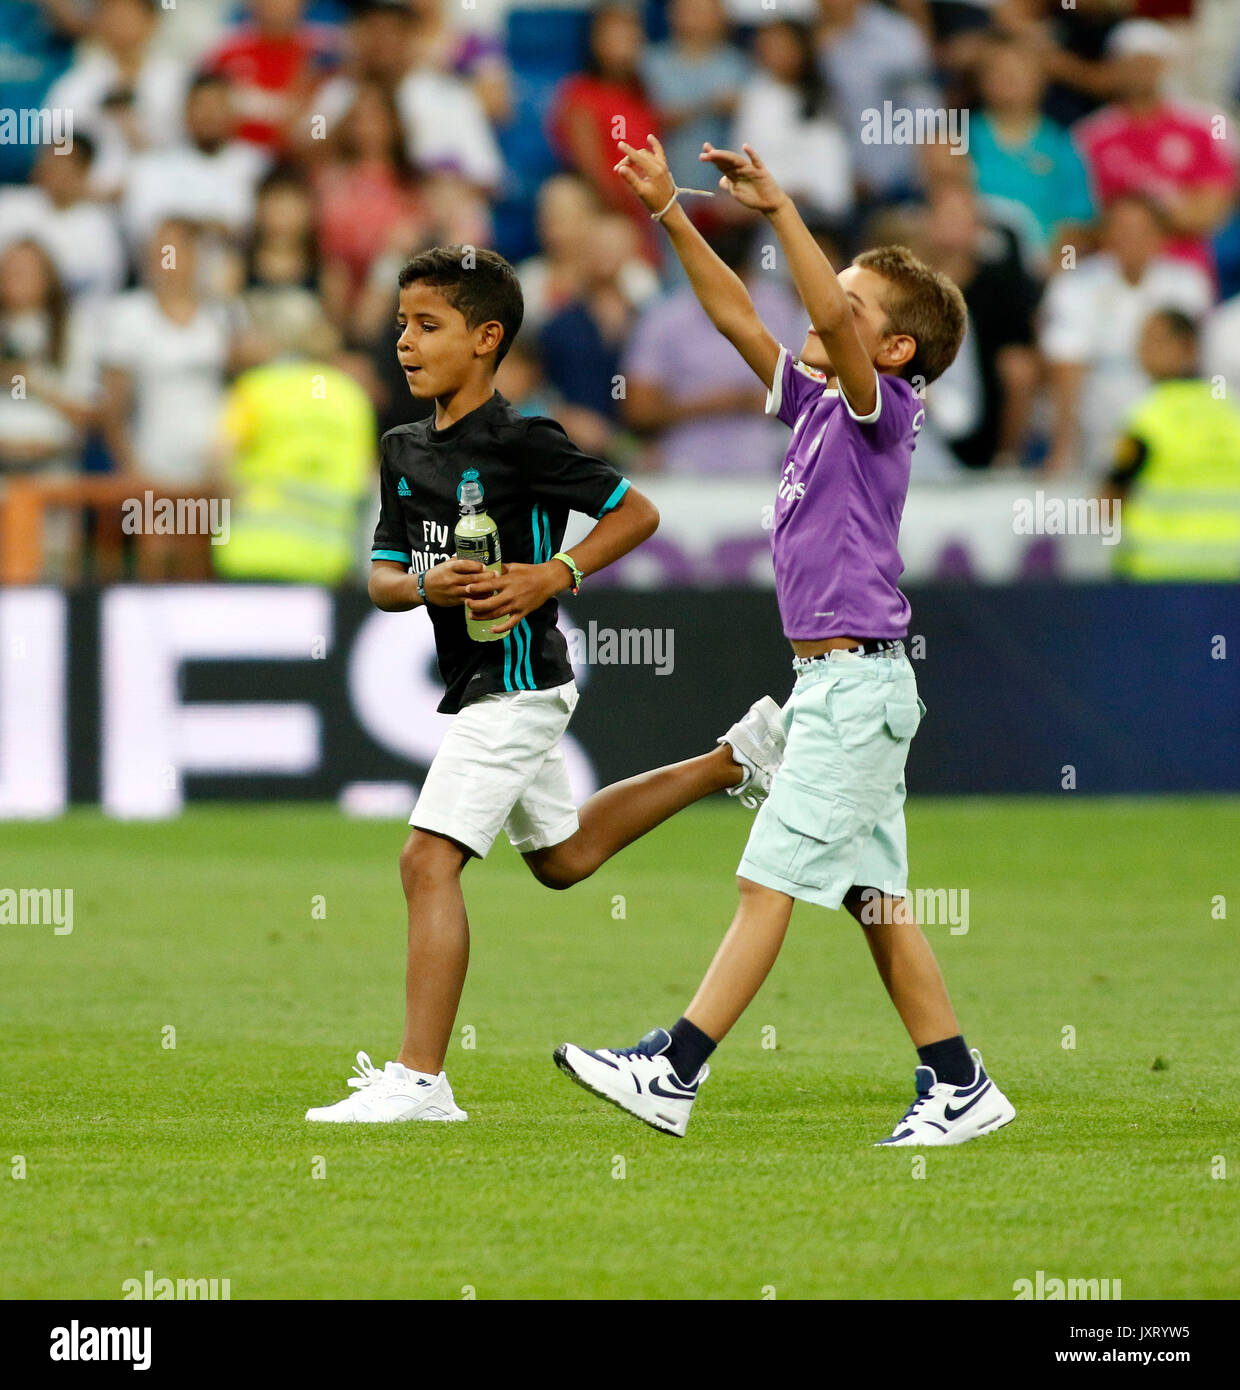 Madrid, Spain. 16th Aug, 2017. Hijo de  Cristiano Ronaldo (Real Madrid) during the Spanish Super Cup second leg soccer match between Real Madrid and Barcelona at the Santiago Bernabeu Stadium in Madrid, Wednesday, Aug. 16, 2017. Credit: Gtres Información más Comuniación on line,S.L./Alamy Live News Stock Photo